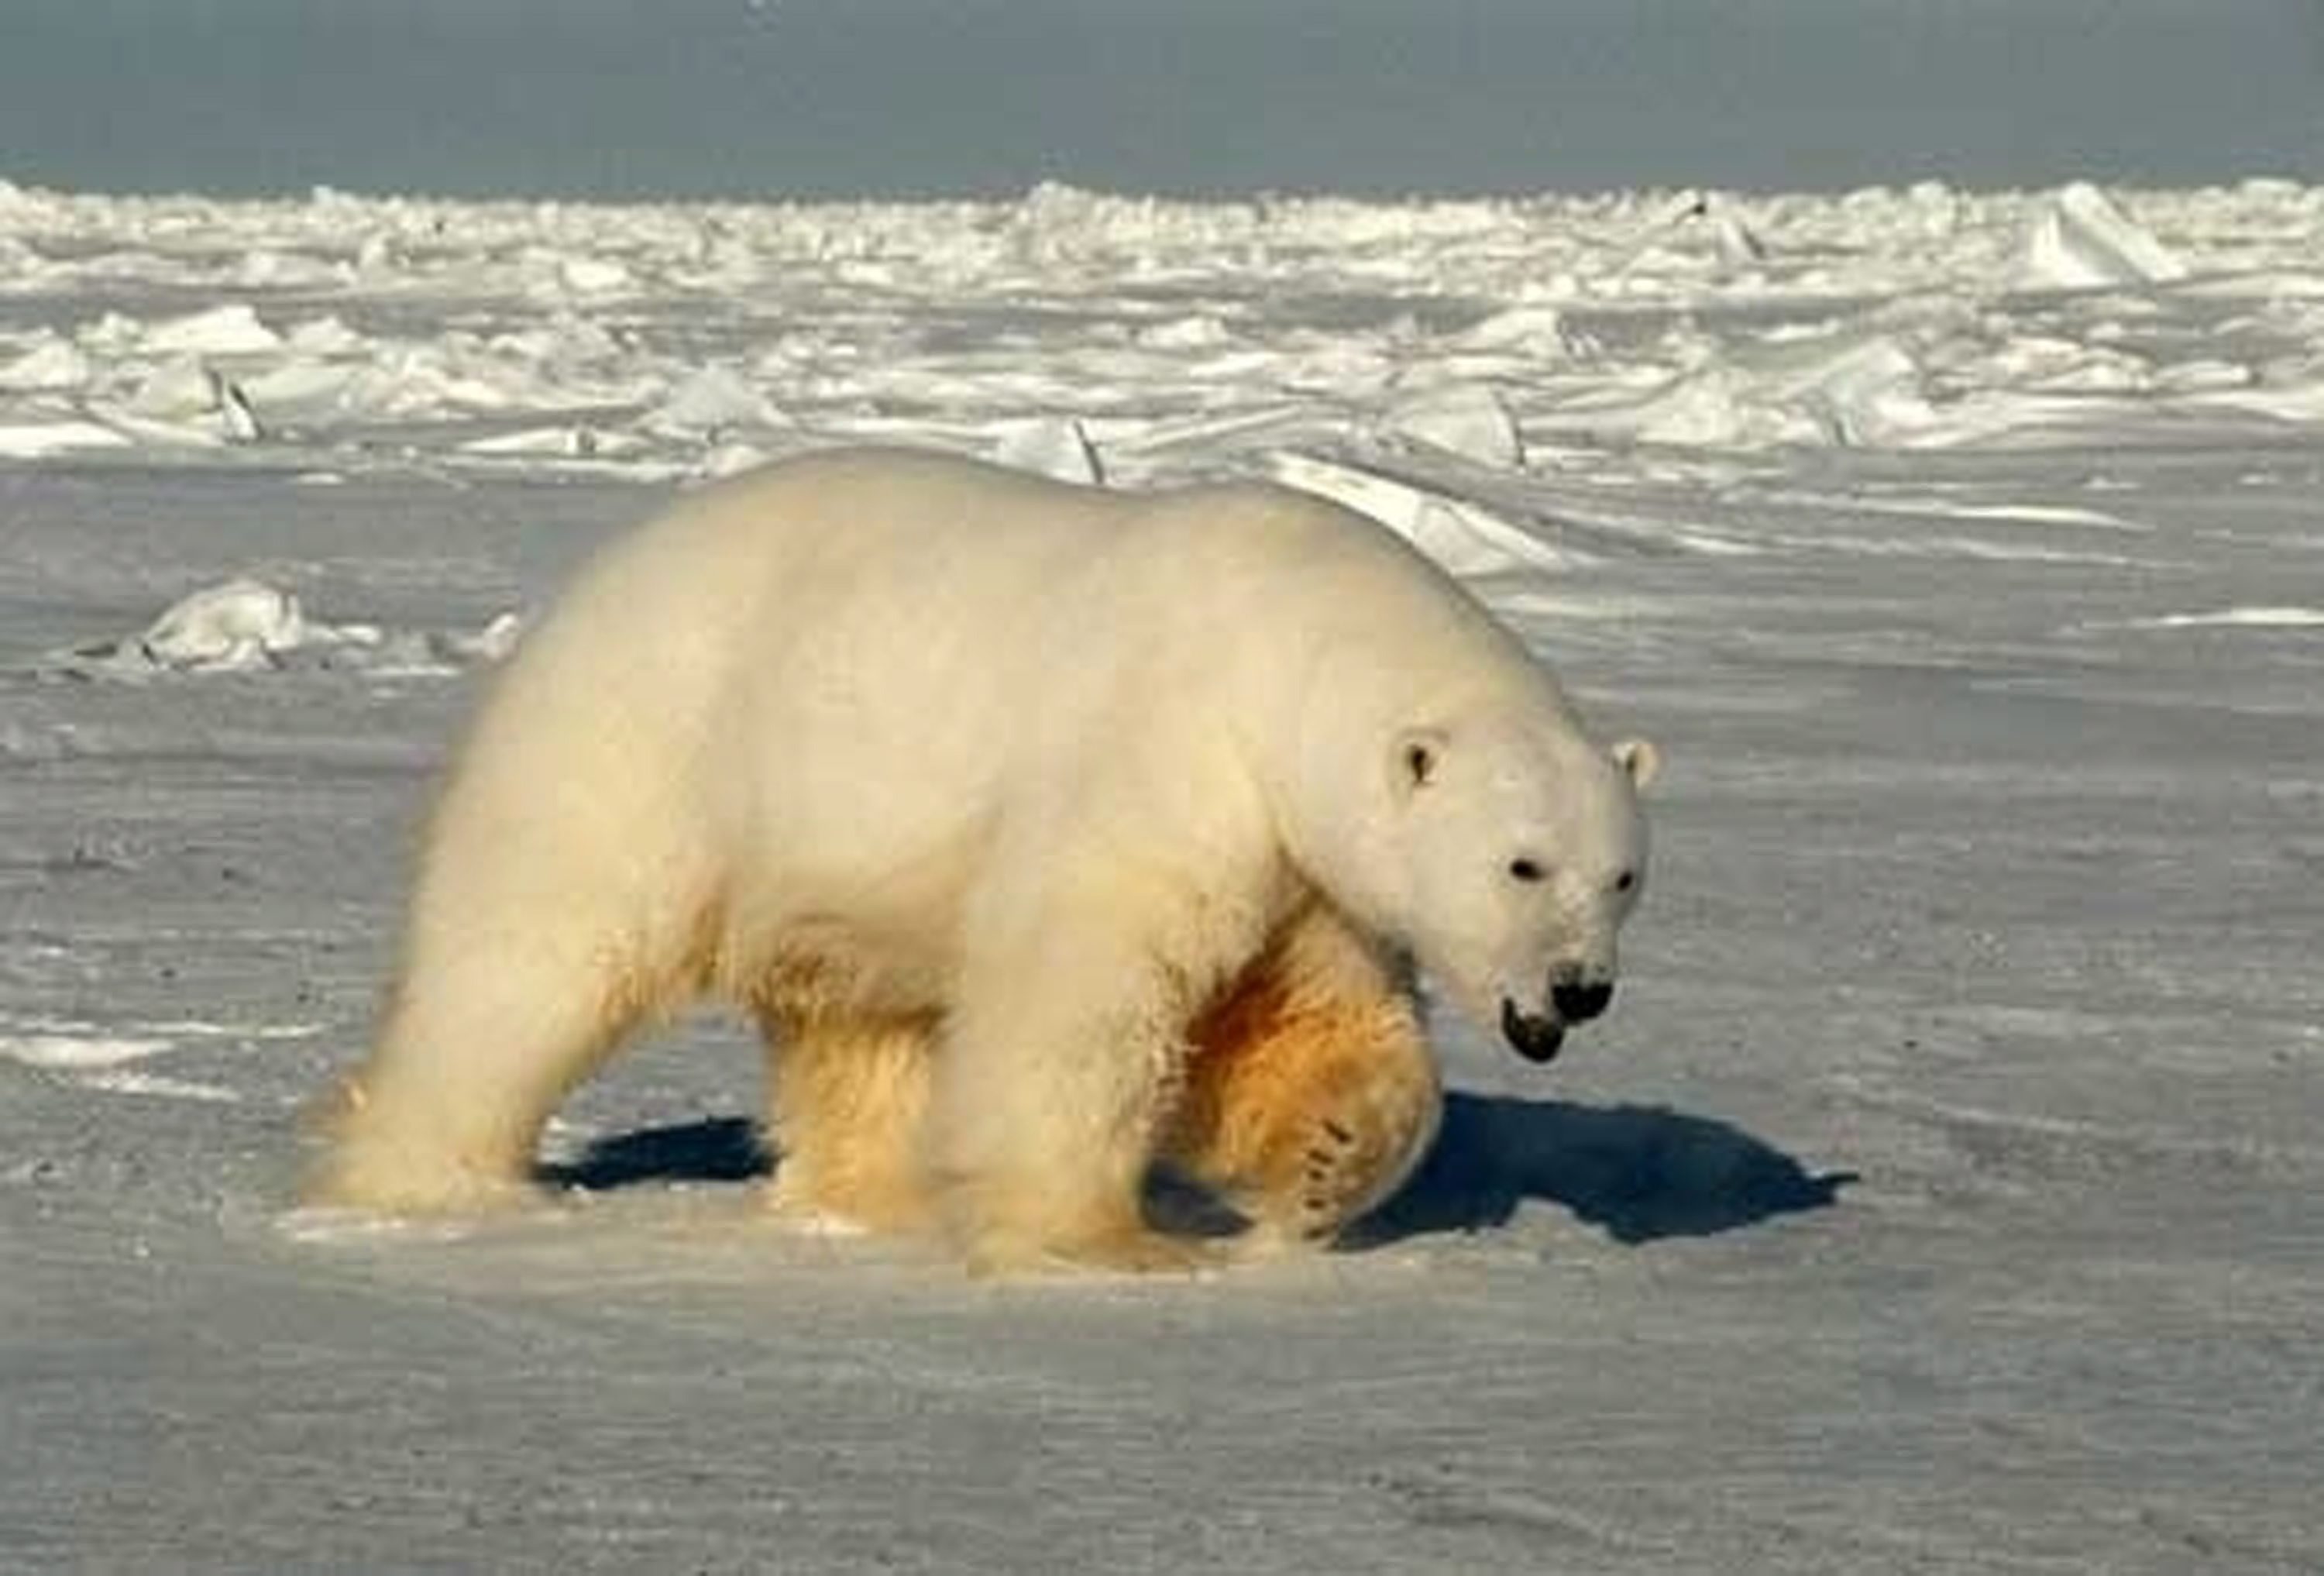 A male polar bear approaches biologists in the Beaufort Sea in 2005. Male bears are more affected than female bears by incidents of alopecia syndrome. (Steven C. Amstrup/USGS/AP)